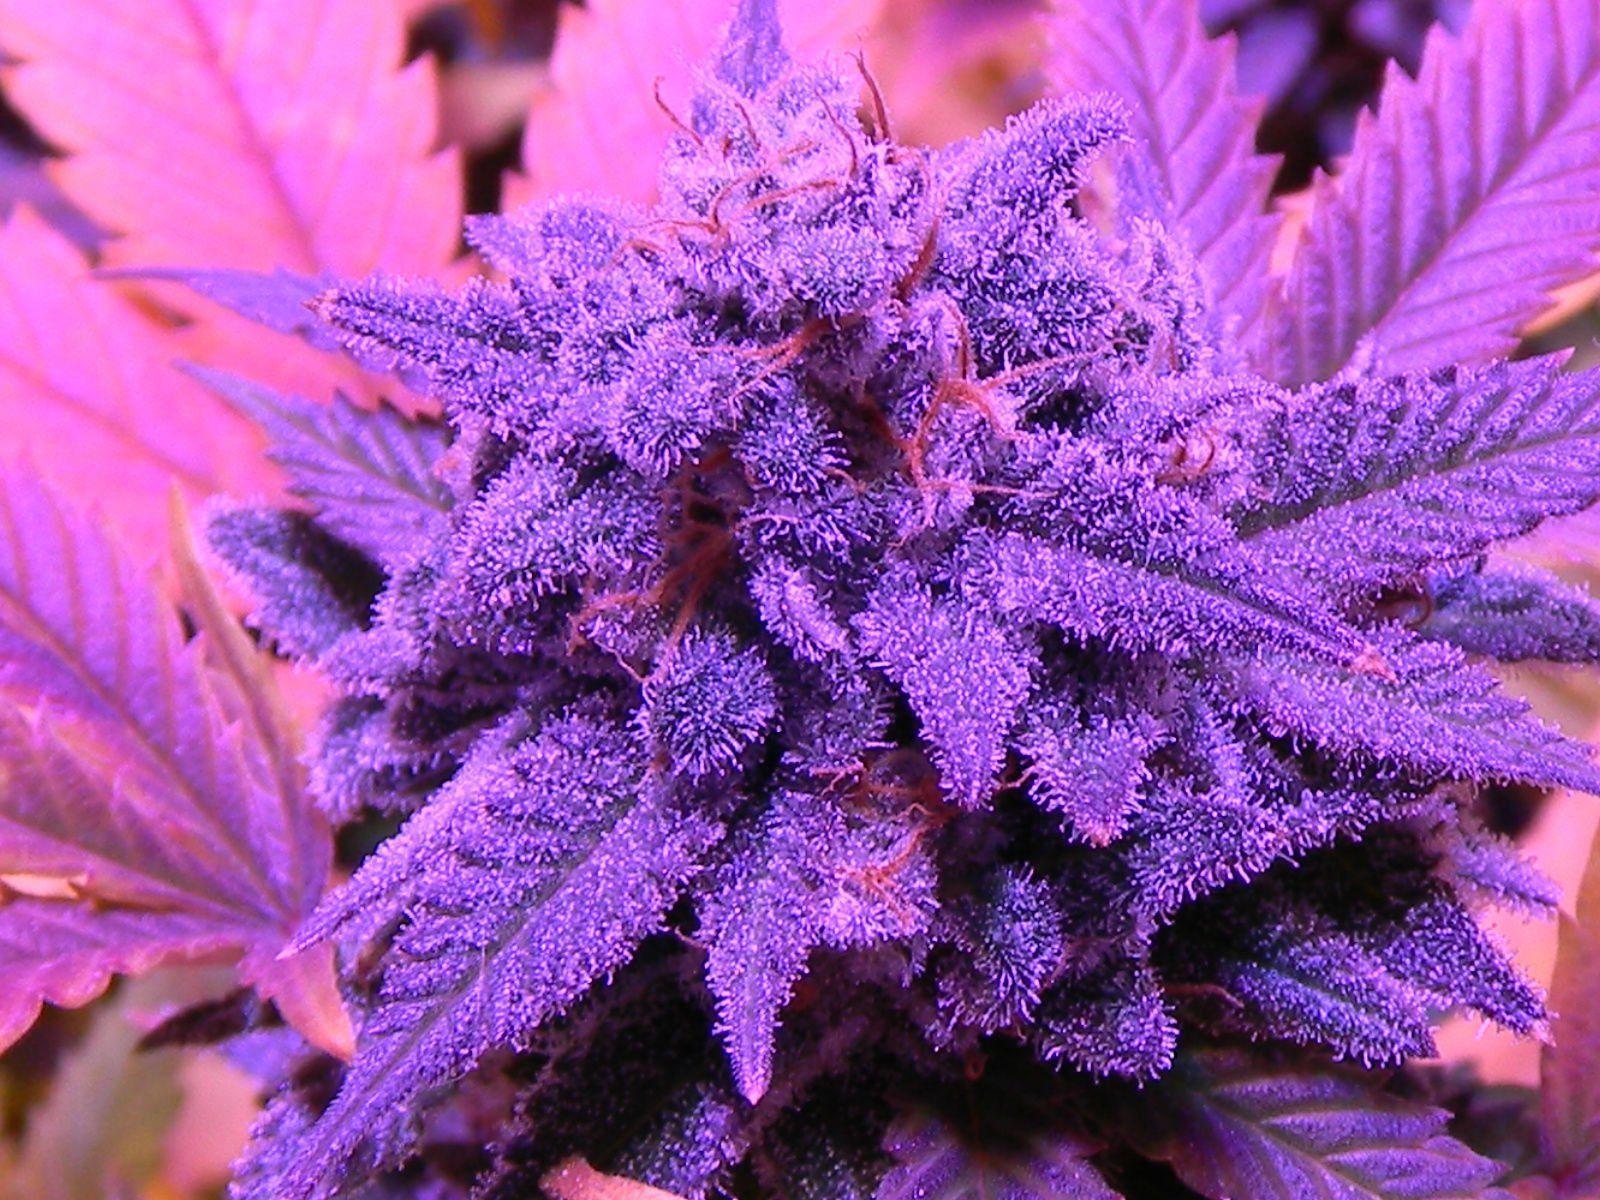 Purple Weed Wallpapers - Top Free Purple Weed Backgrounds - WallpaperAccess